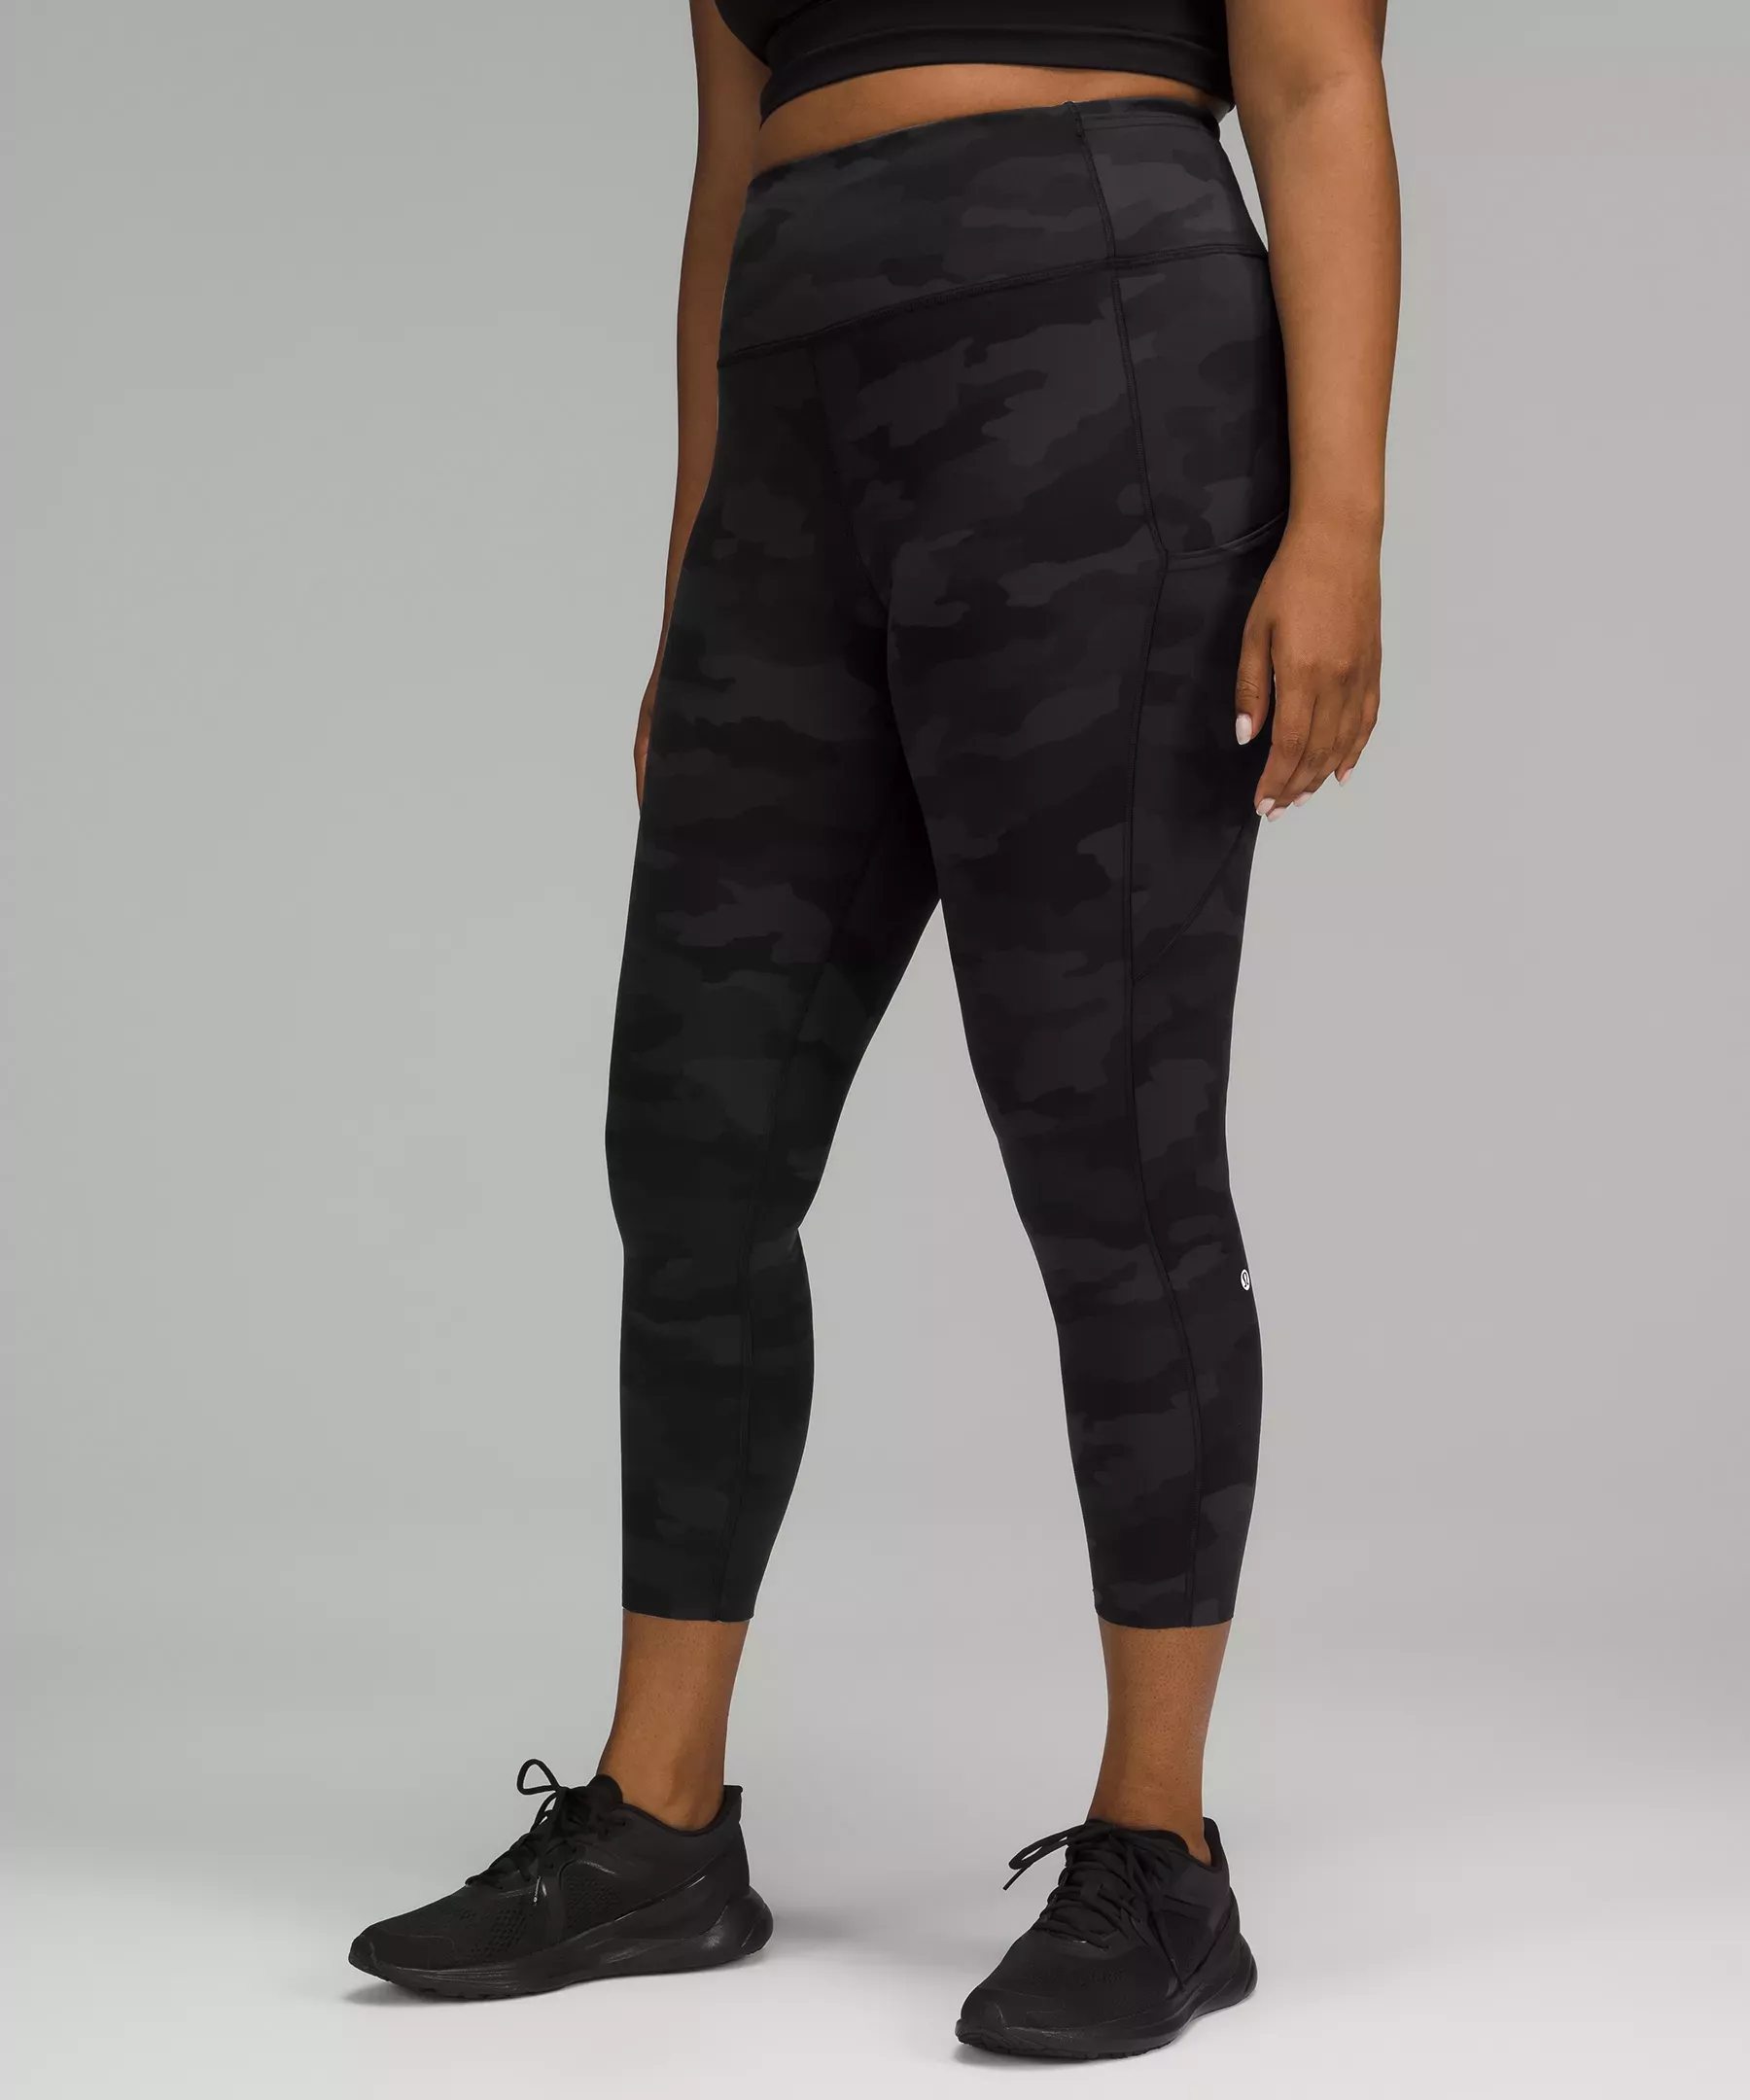 Lululemon Fast and Free High-Rise Crop II 23 *Reflective